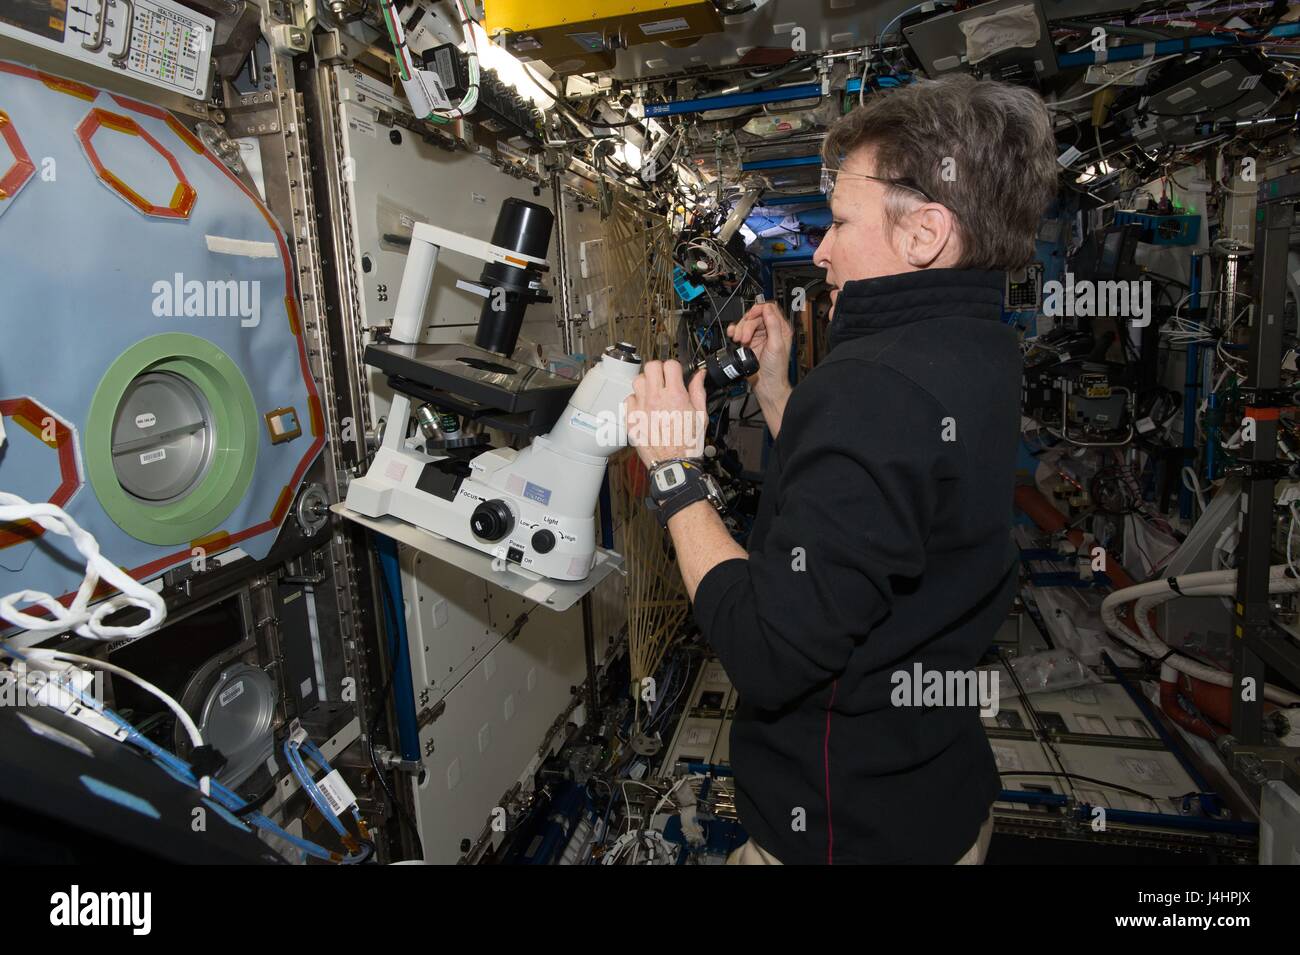 NASA International Space Station Expedition 50 prime crew member astronaut Peggy Whitson uses a microscope in the ISS U.S. Destiny laboratory module February 21, 2017 in Earth orbit.     (photo by NASA   via Planetpix) Stock Photo